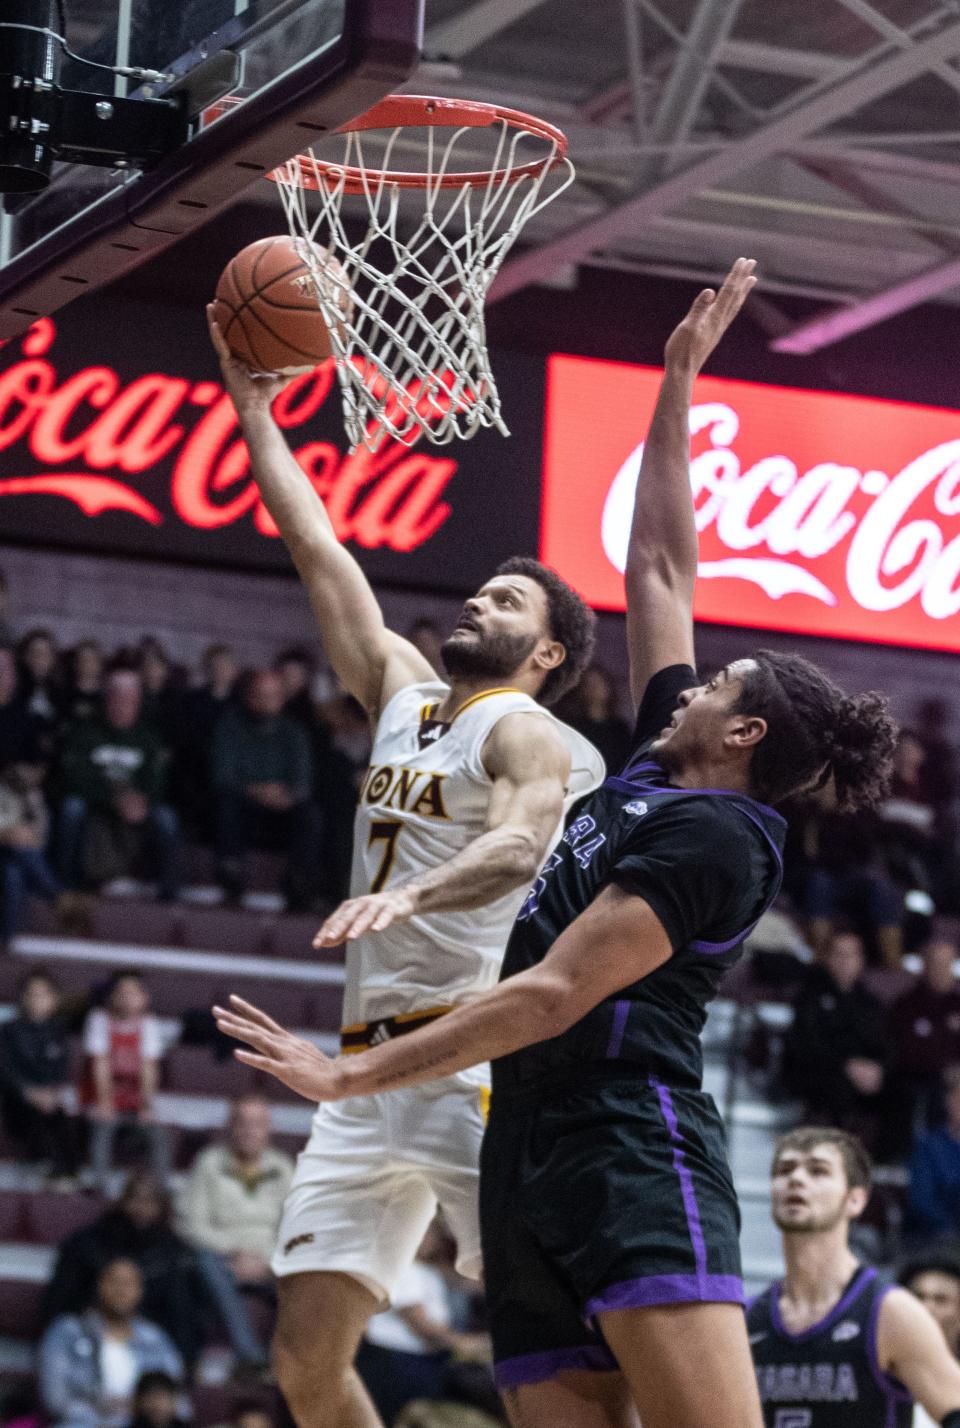 Idan Tretout of Iona drives against Niagara during a MAAC conference basketball game at Iona University in New Rochelle Jan. 7, 2024. Niagara defeated Iona 75-73 with a last second three point basket.